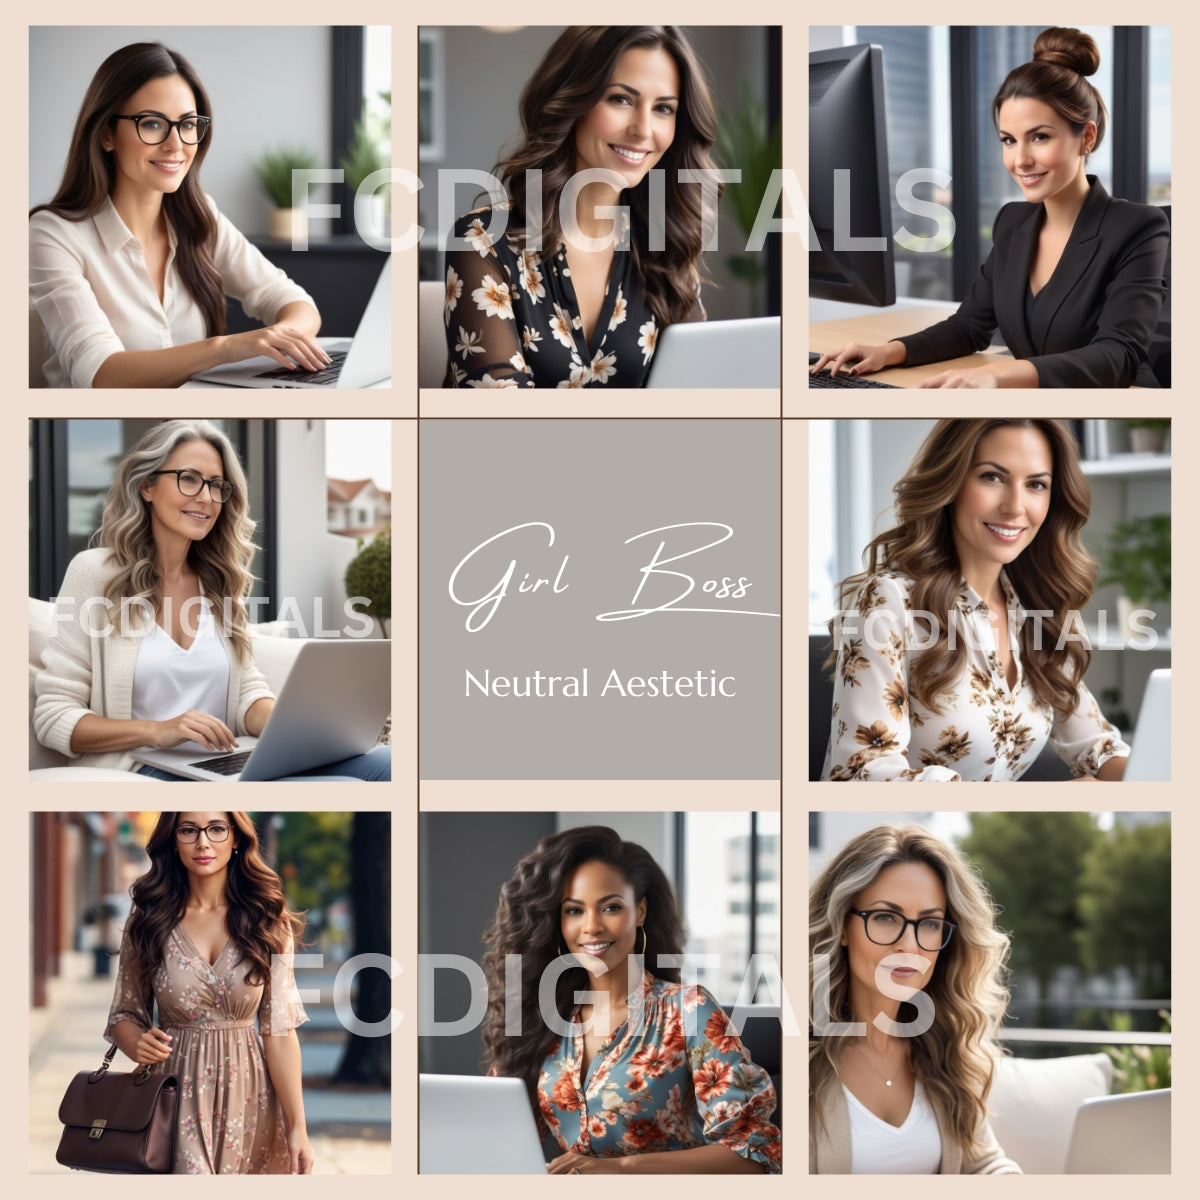 Girl Boss Stock Images, Social Media Marketing Stock Images, Lifestyle Image Bundle, Work from Home, Business Women Photos, Done For You